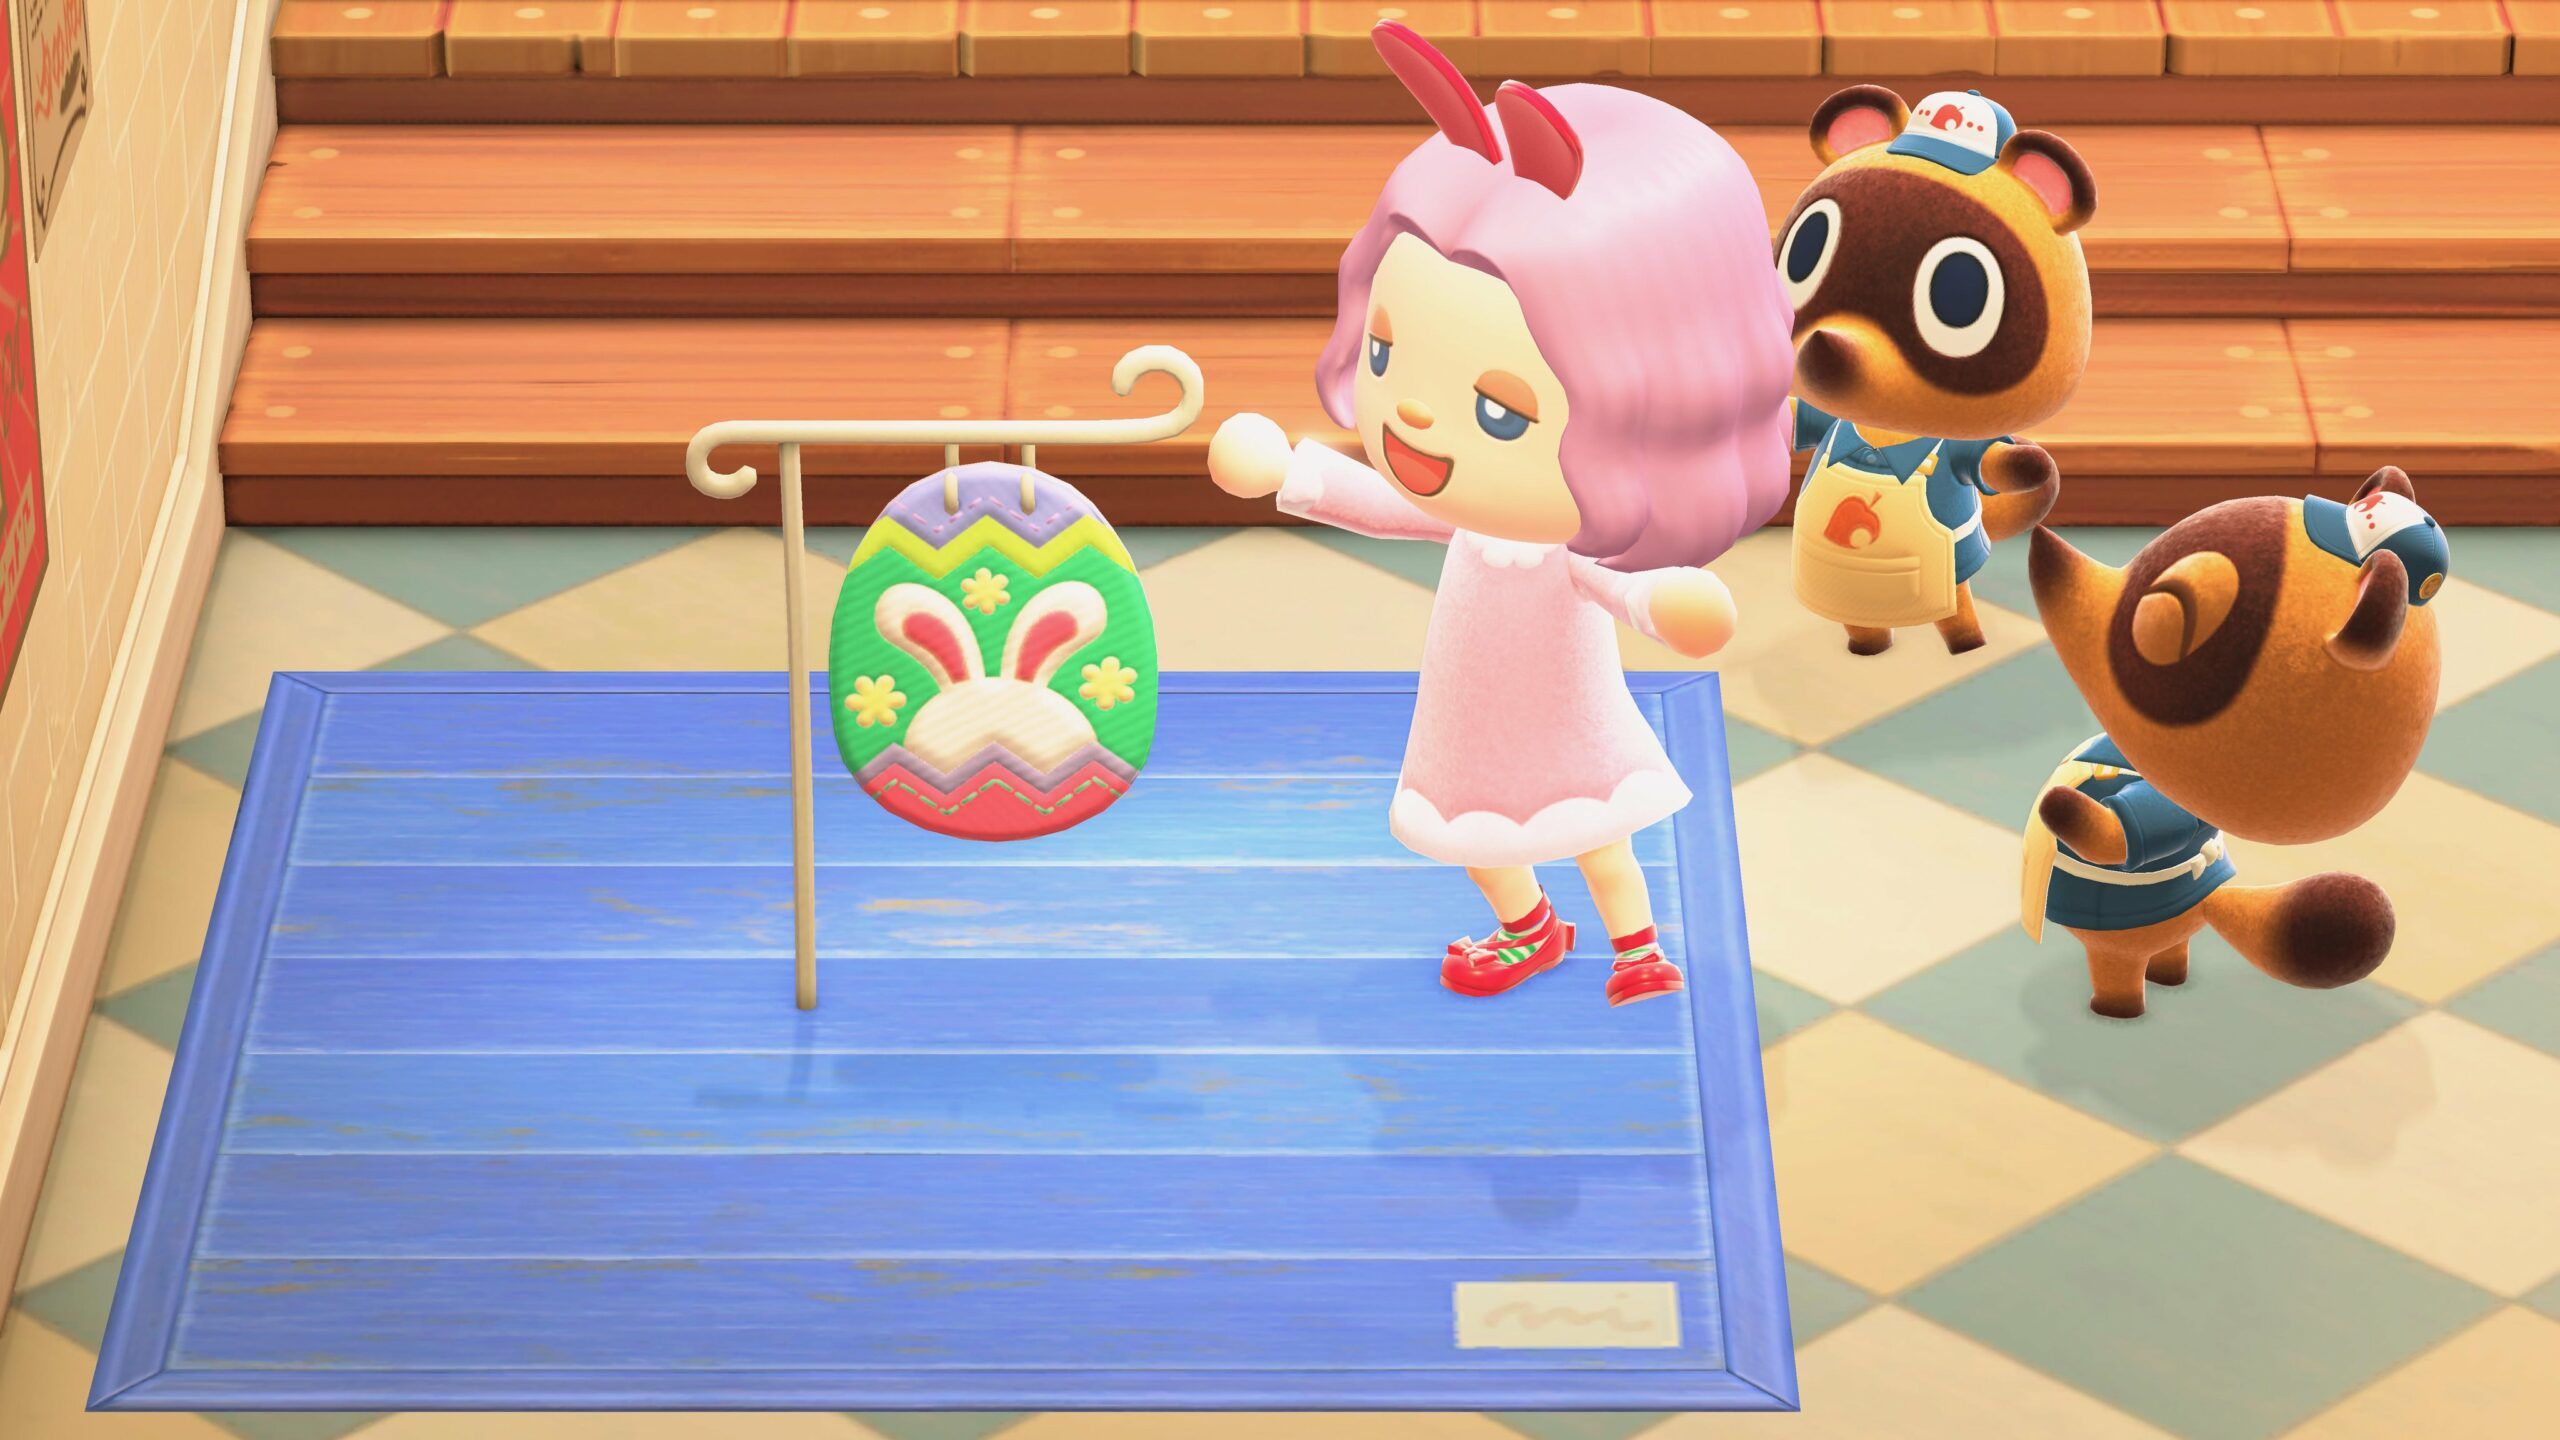 Animal Crossing Bunny Day 2021 ACNH Start Date, Time and New Items